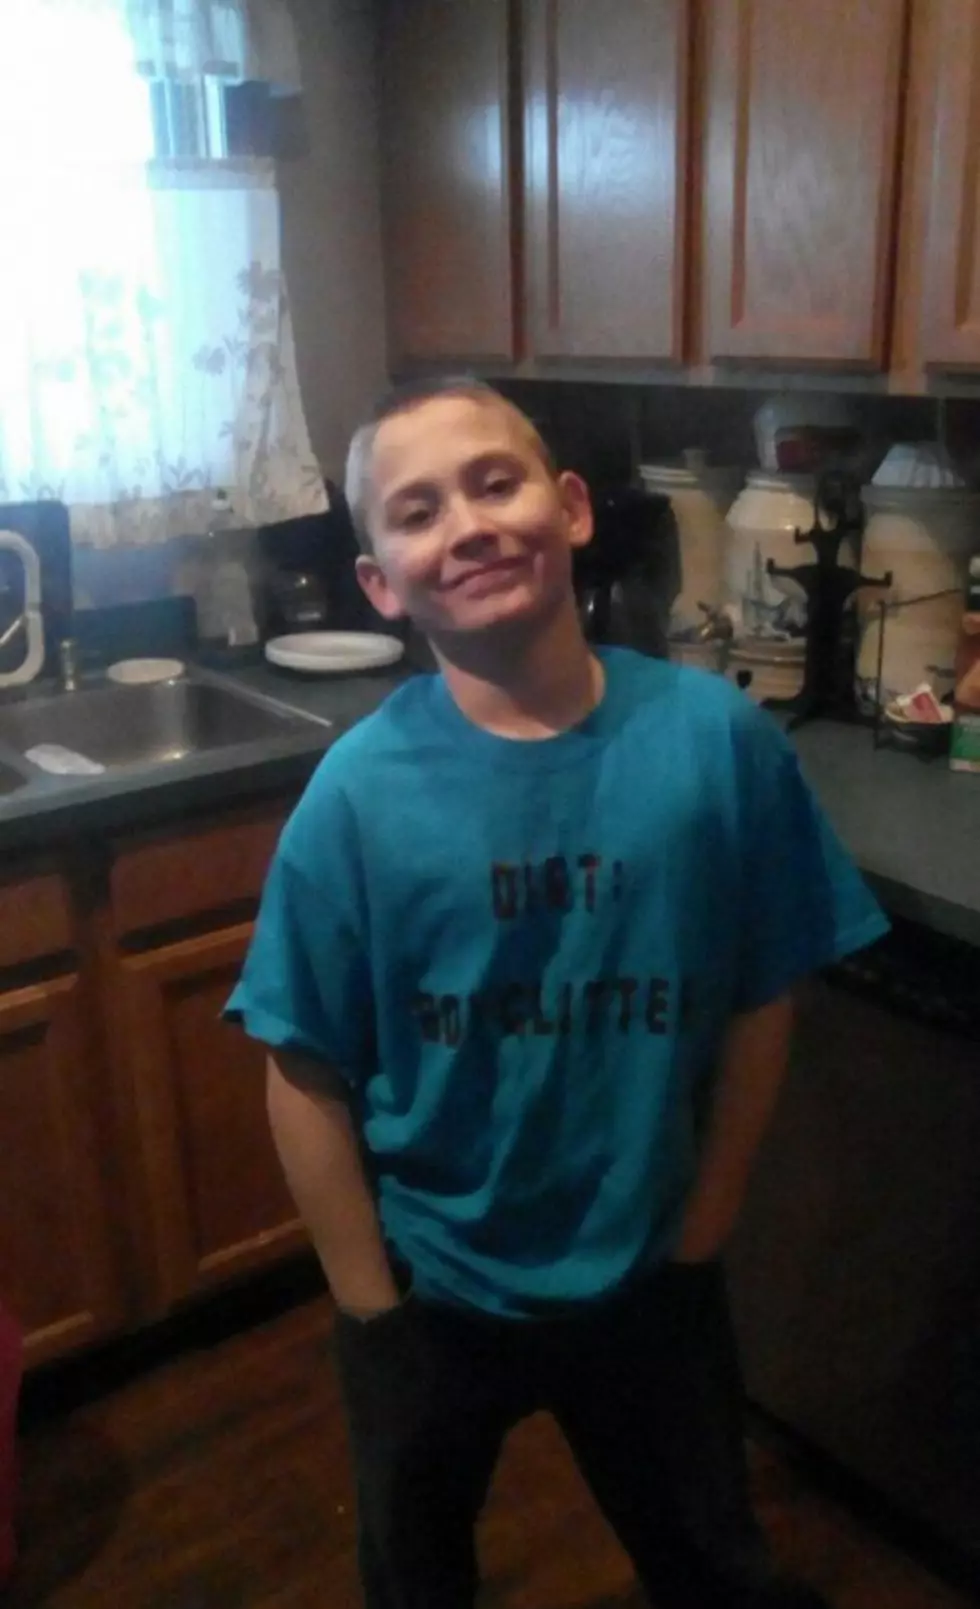 Three Arrested on Homicide Charges For Death of 12-Year-Old Boy